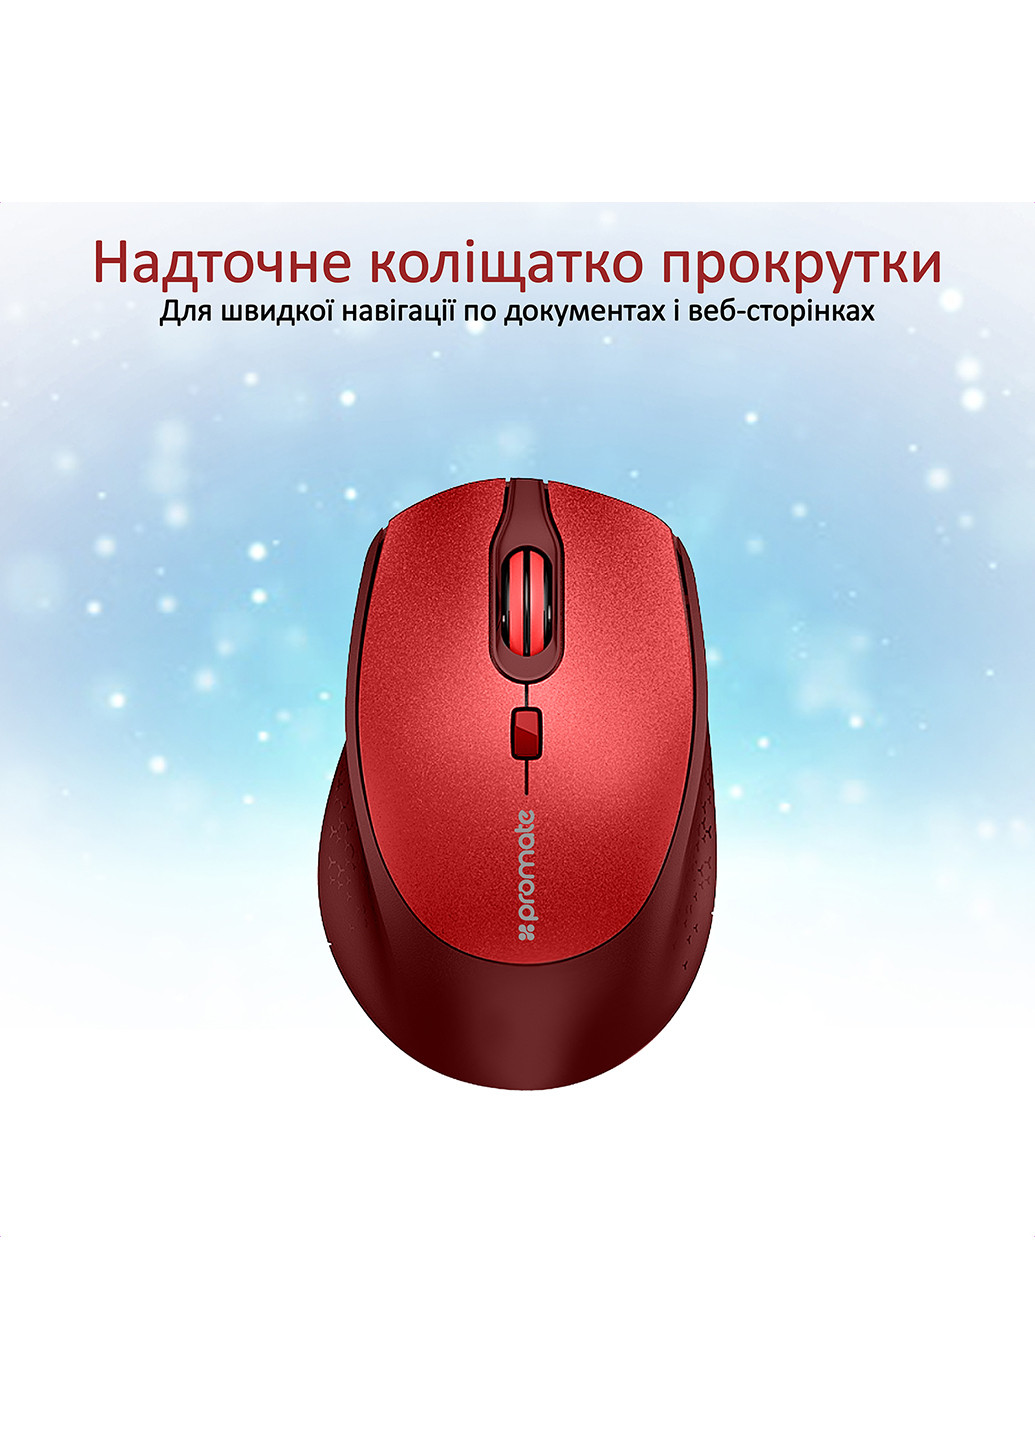 Мышь Clix-5 Wireless Promate clix-5.red (217315785)